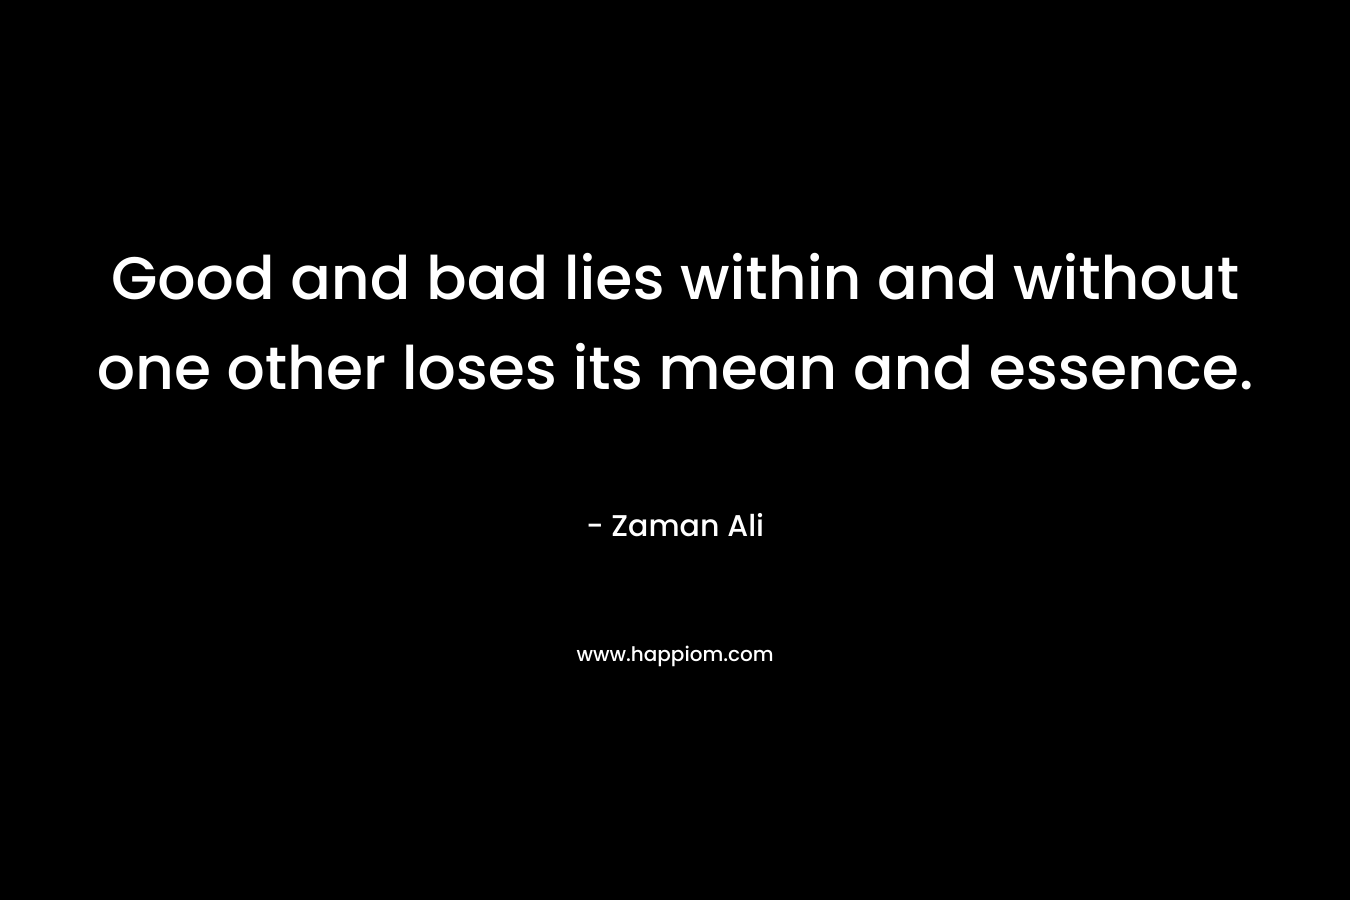 Good and bad lies within and without one other loses its mean and essence. – Zaman Ali